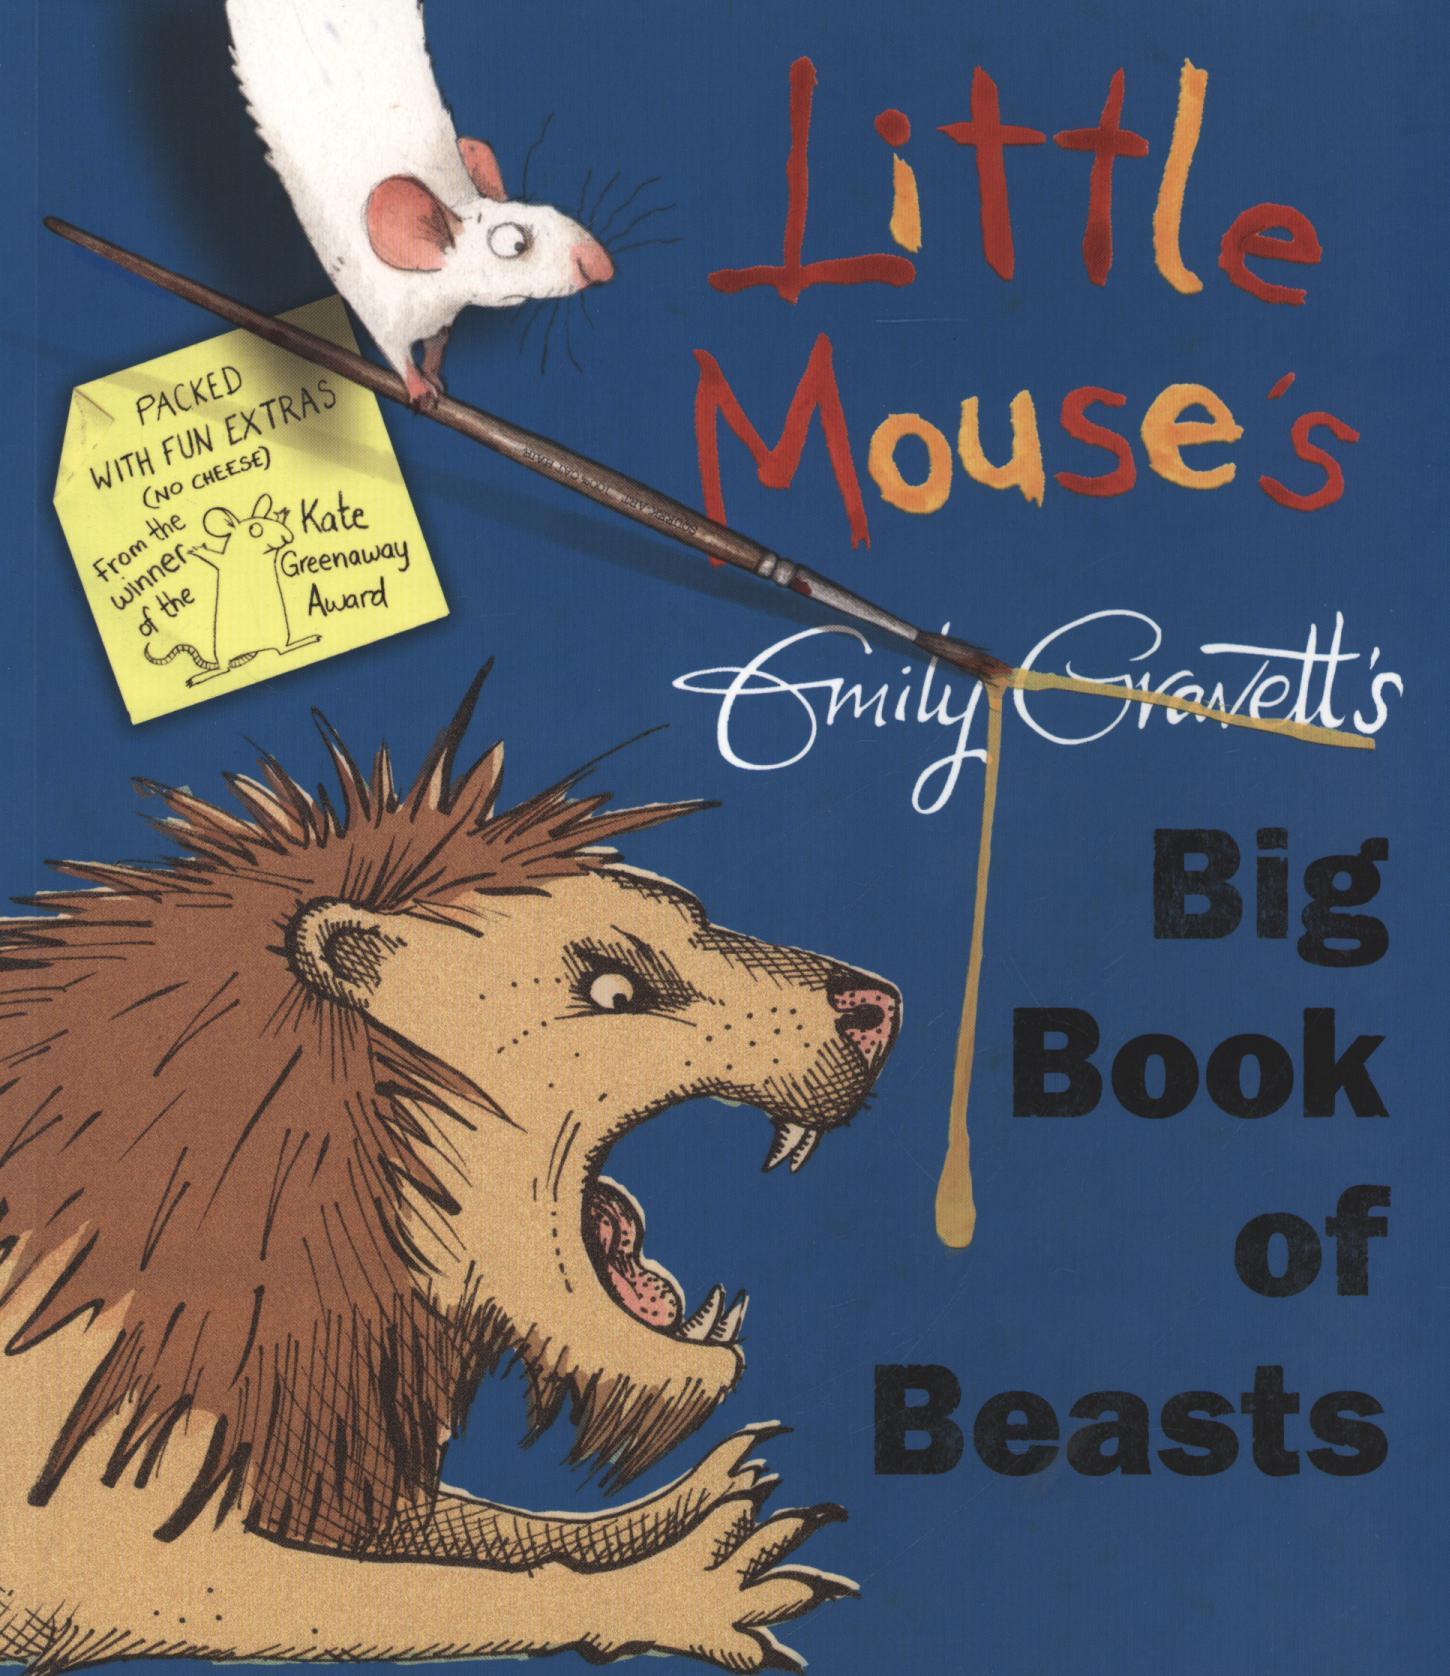 Little Mouse's Big Book of Beasts